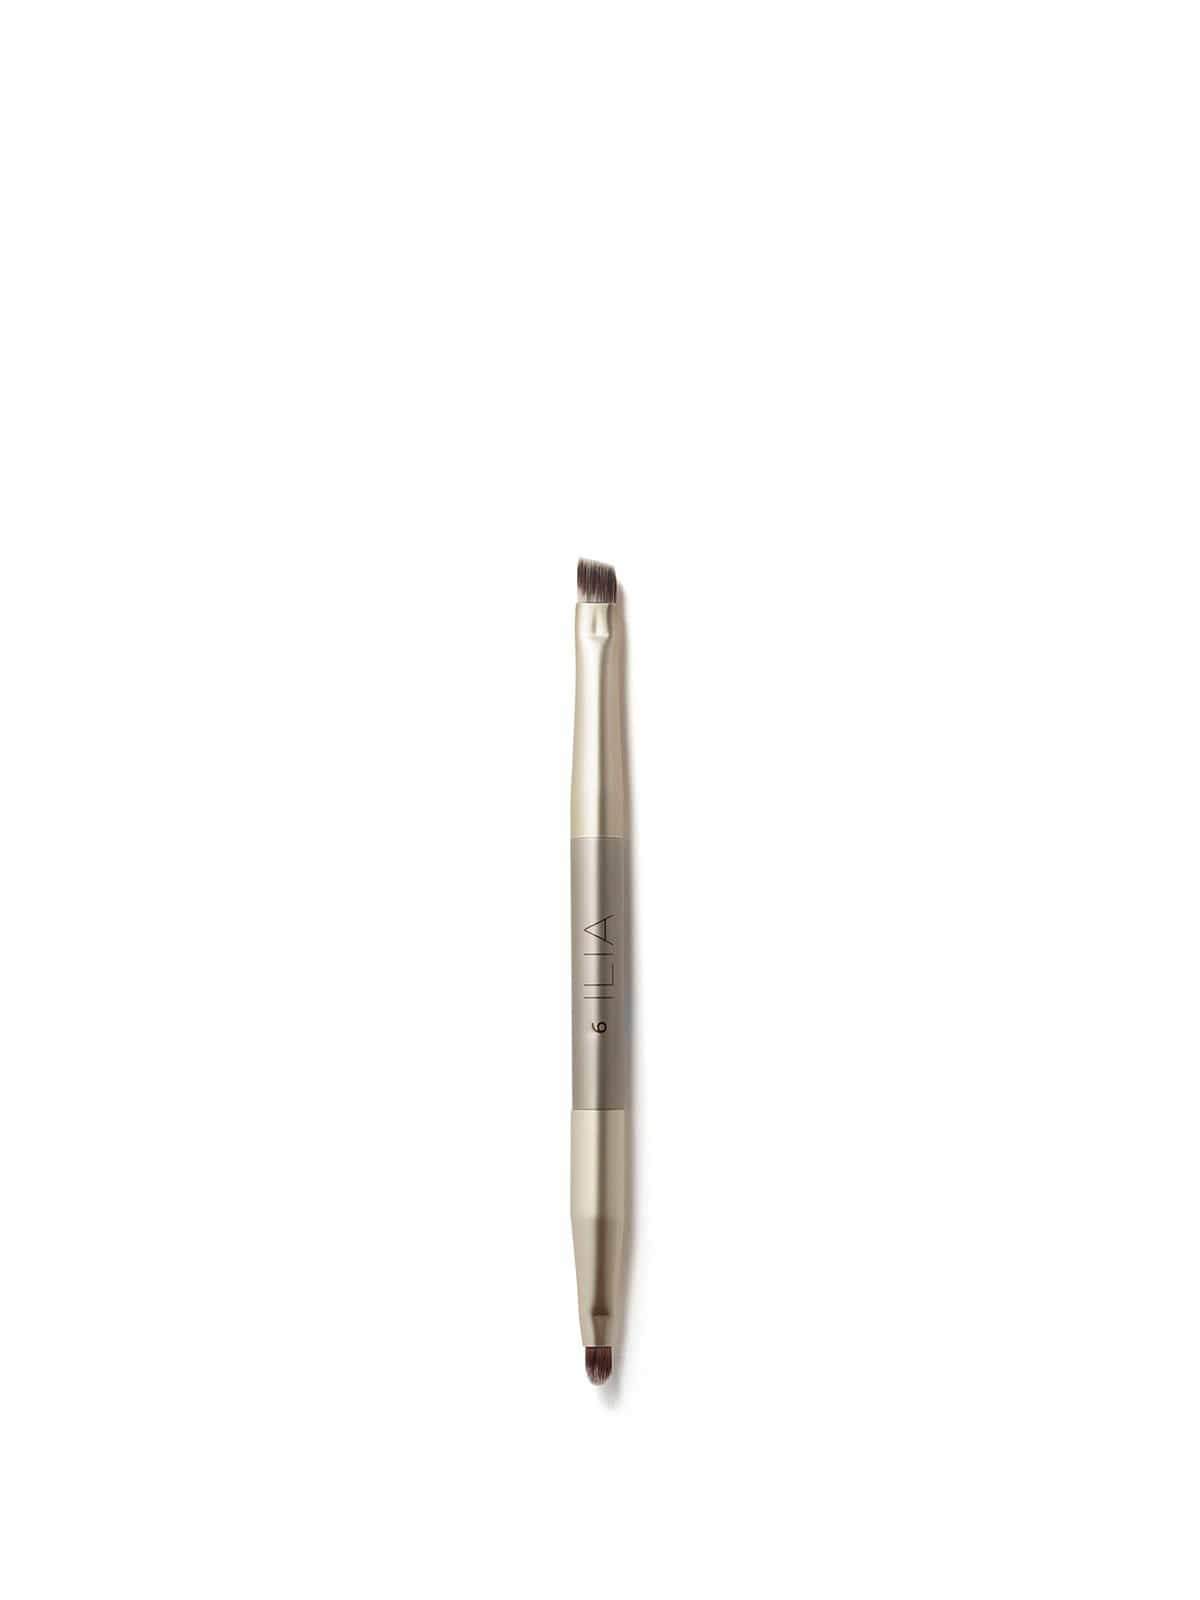 ON POINT LINER & DEFINITION BRUSH